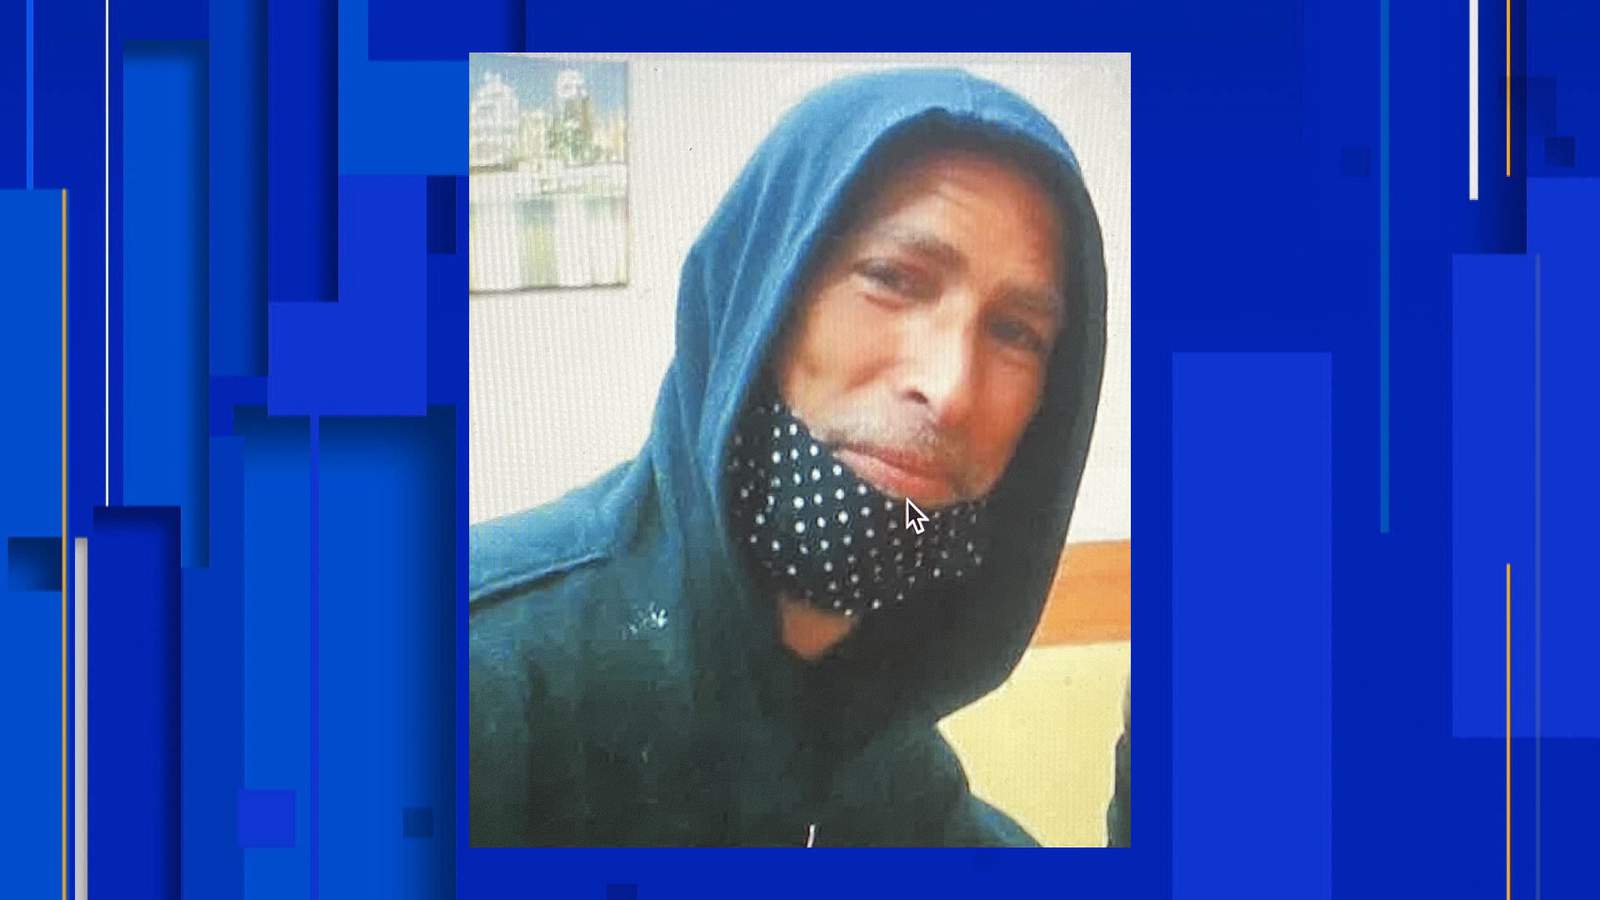 Detroit police search for 51-year-old man missing since Dec. 30